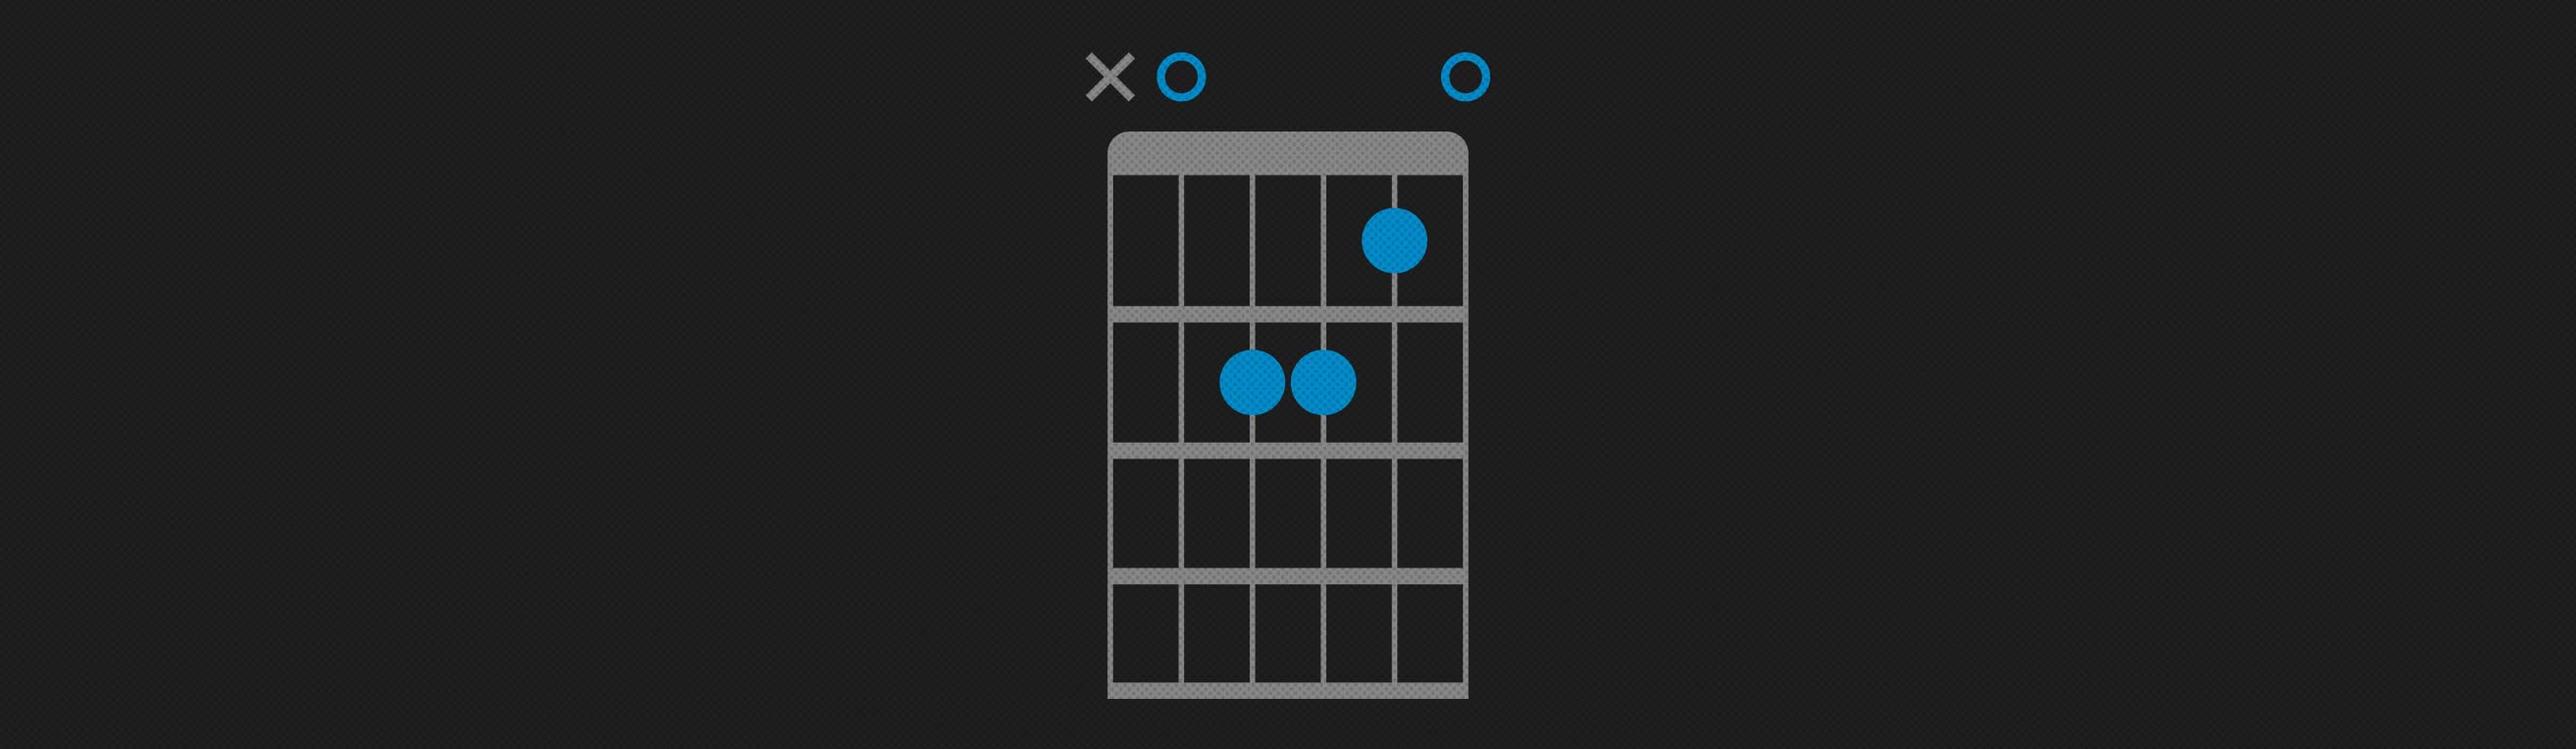 how to play an a minor chord on guitar